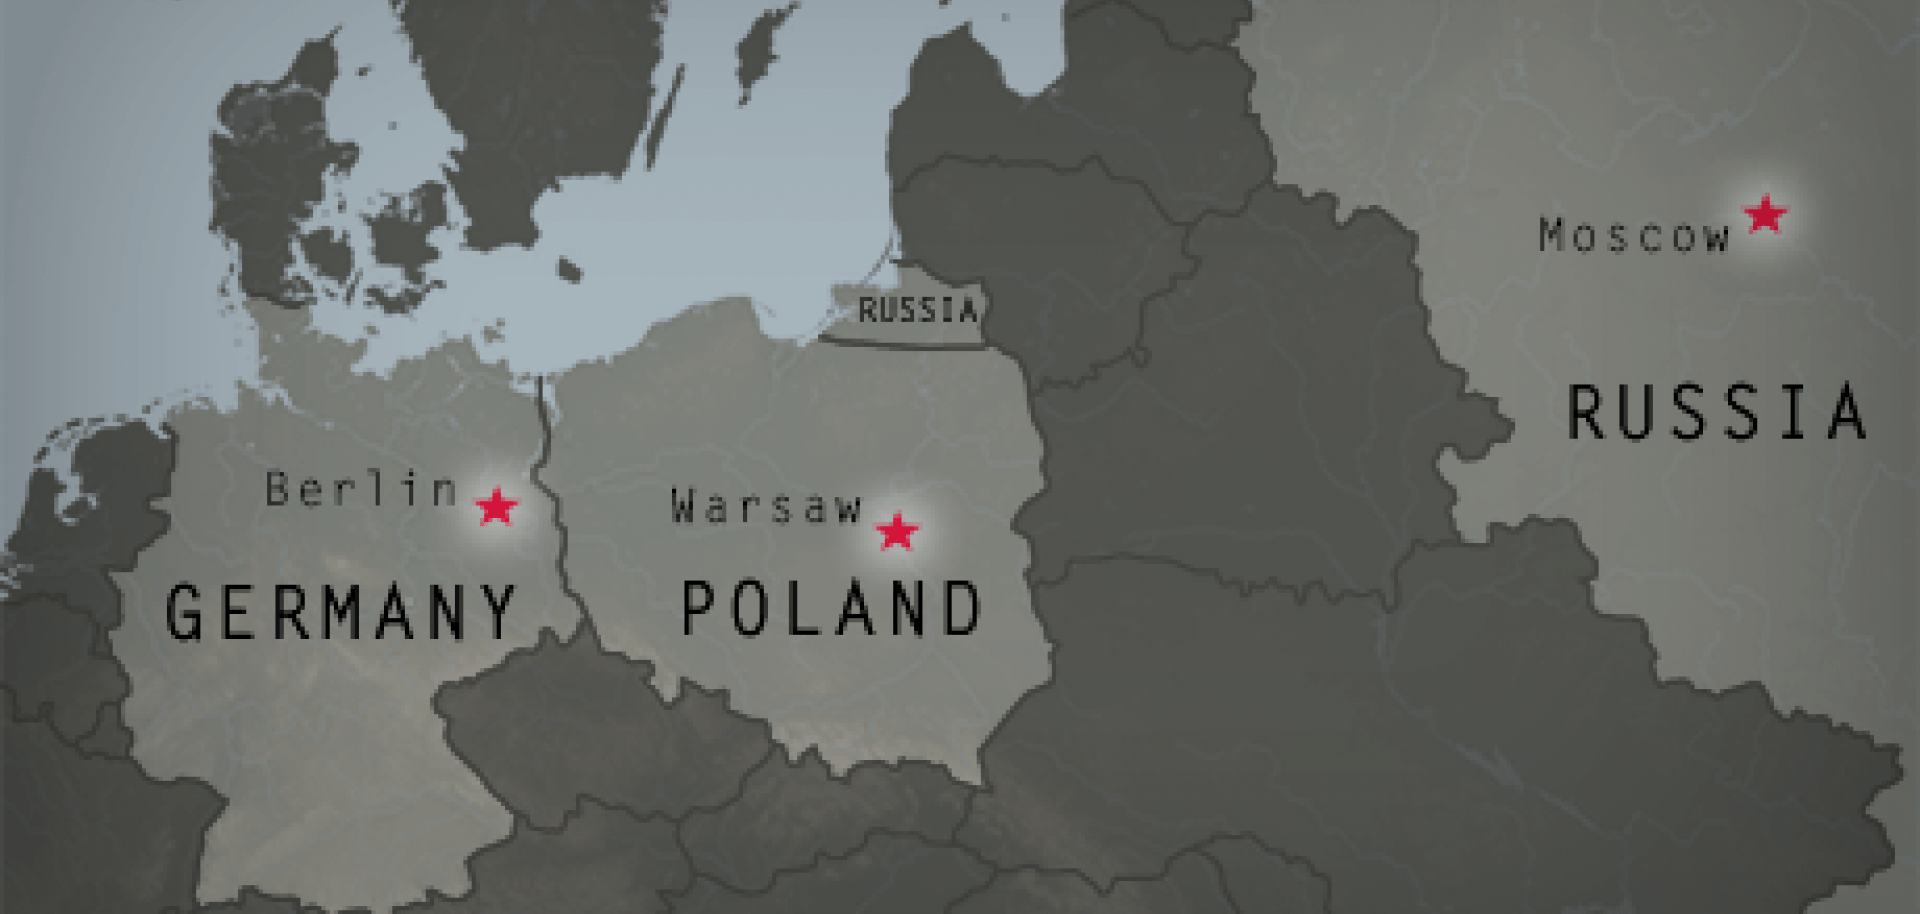 Germany's Trilateral Initiative with Russia and Poland